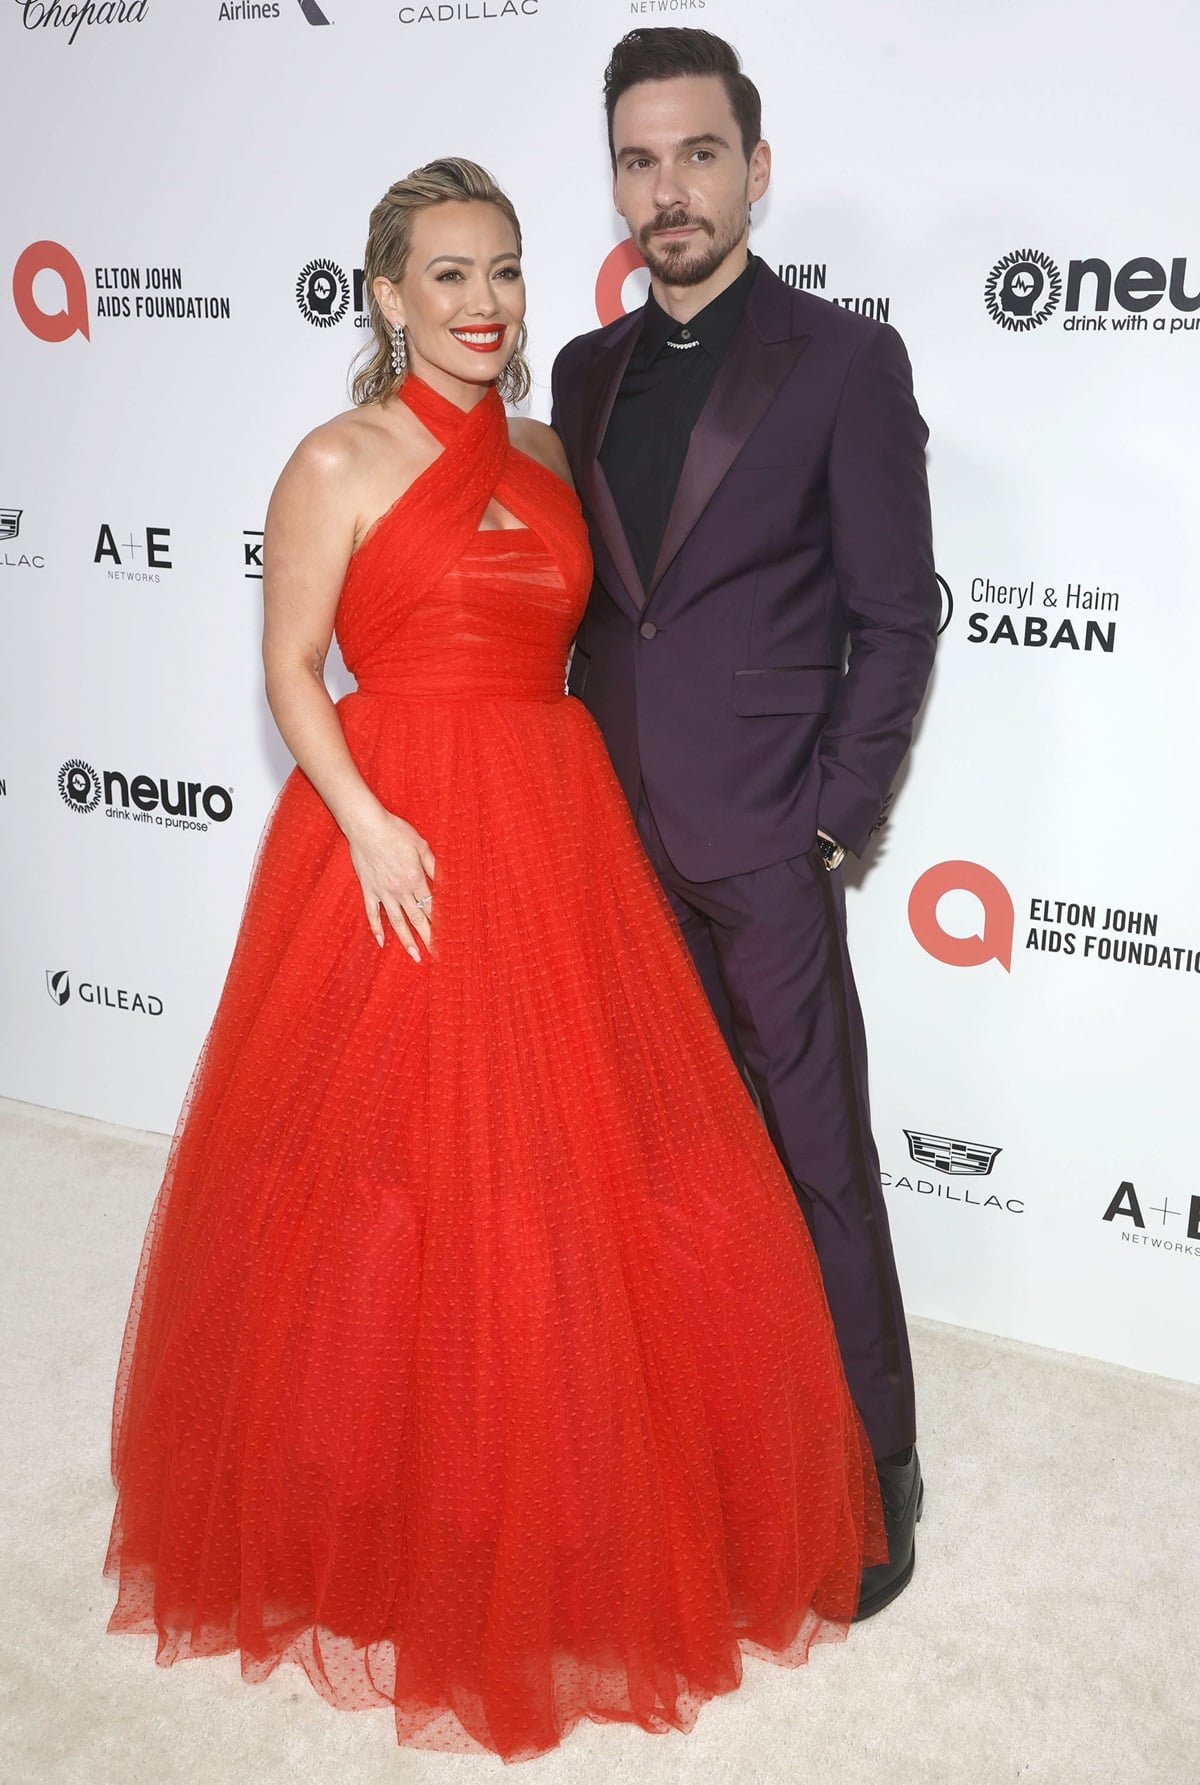 Hilary Duff, in a red Giambattista Valli ballgown with a halter neckline, posing with Matthew Koma at the Elton John AIDS Foundation's 31st Annual Academy Awards Viewing Party